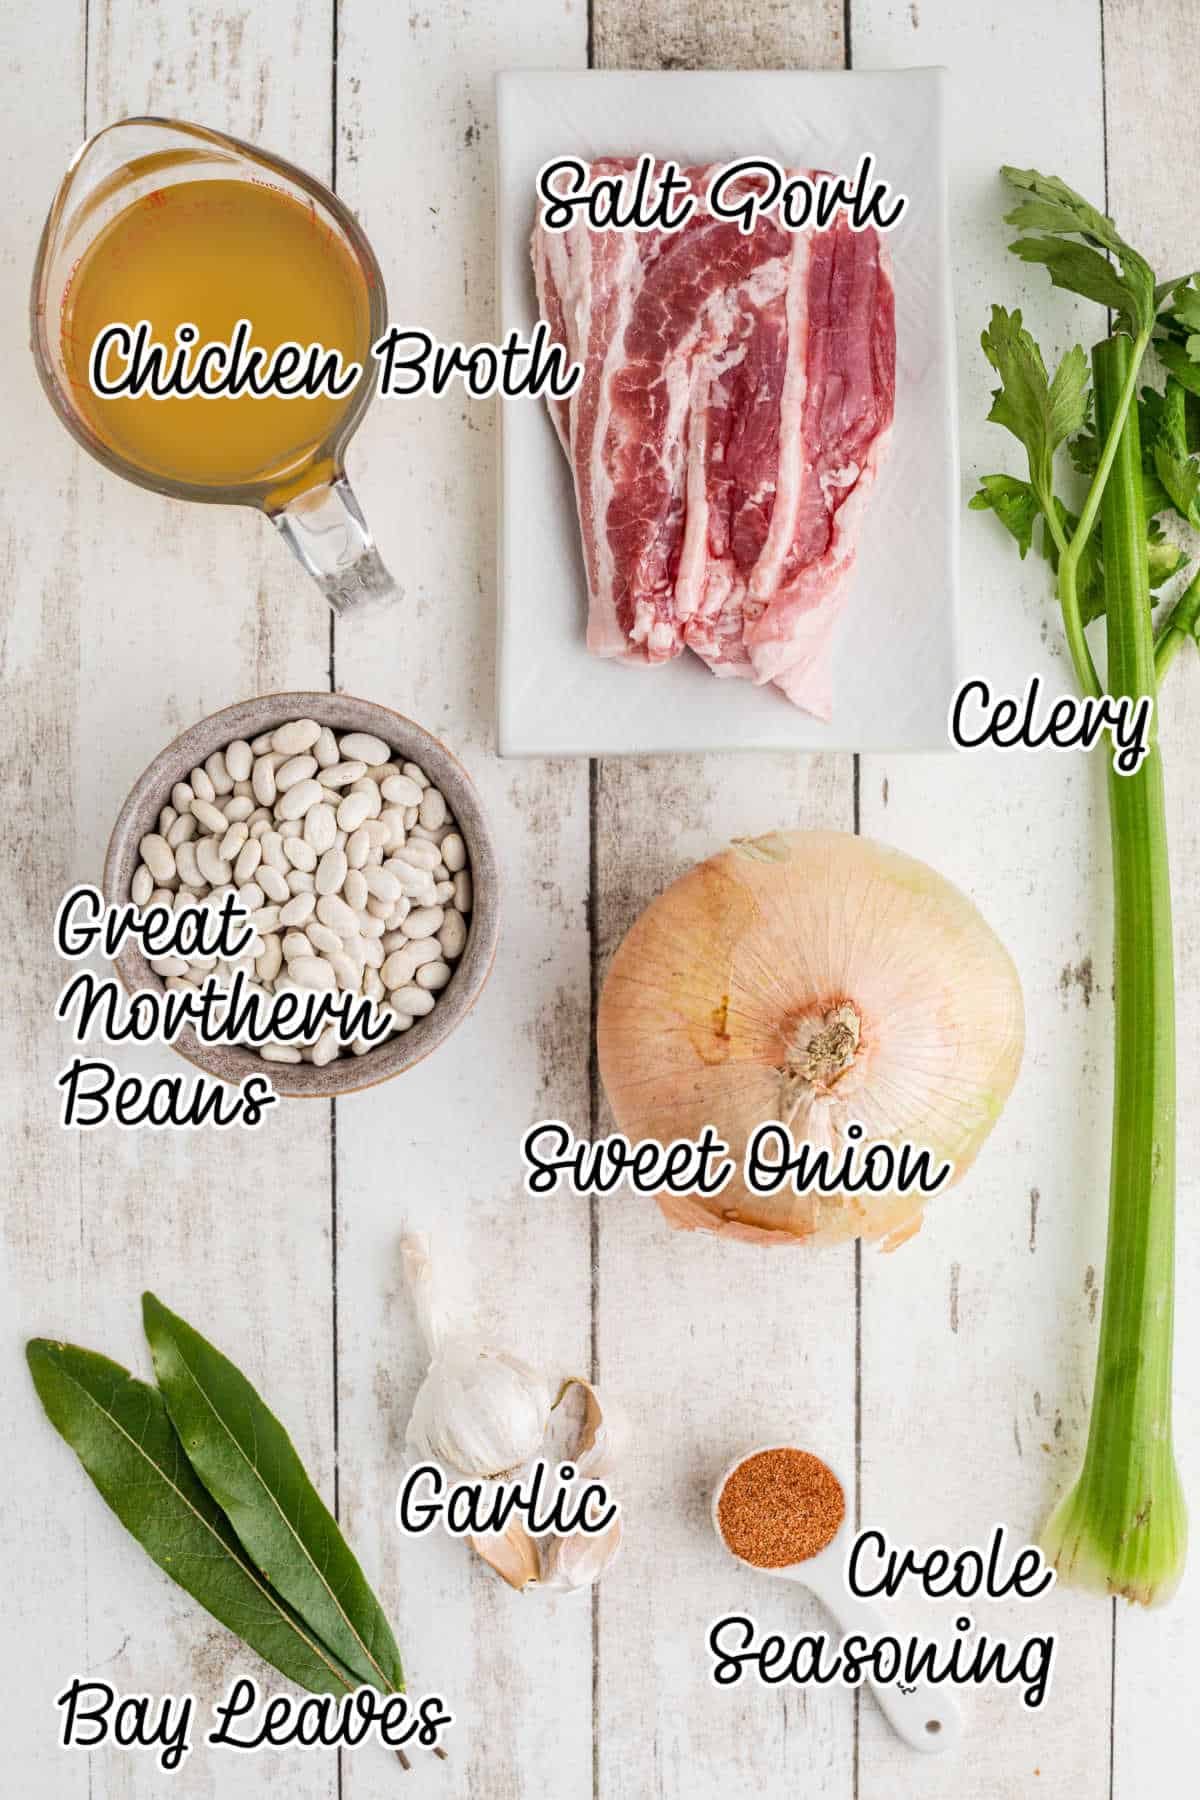 Ingredients needed to make a southern great northern beans recipe, all laid out with text overlay.